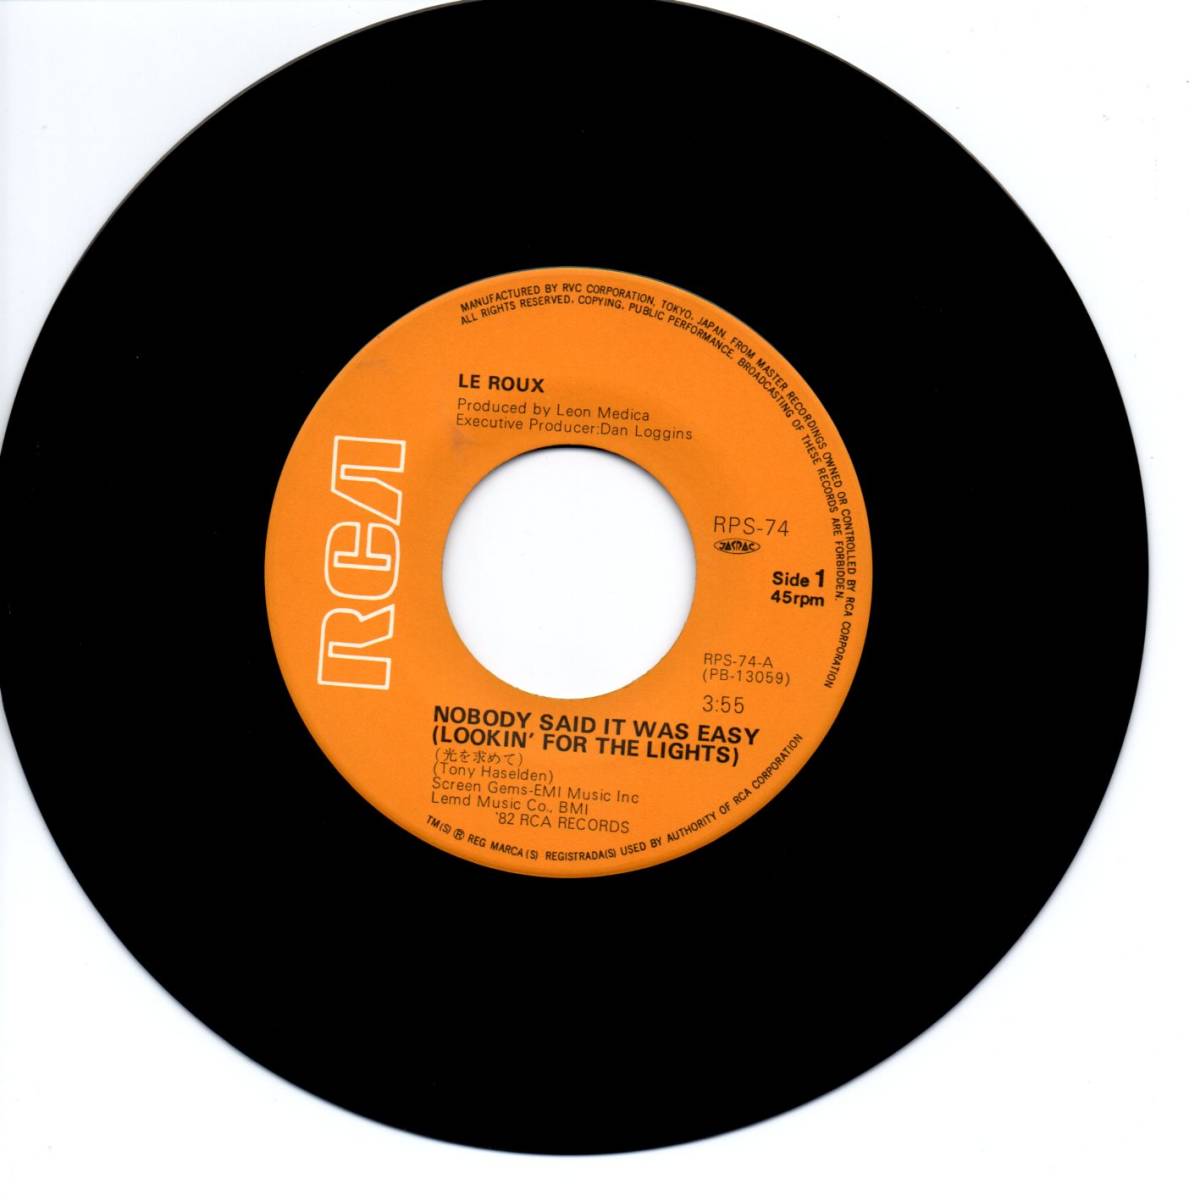 Le Roux 「Nobody Said It Was Easy (Looking For The Lights) / Can't You See It In My Eyes」 国内盤EPレコード _画像3